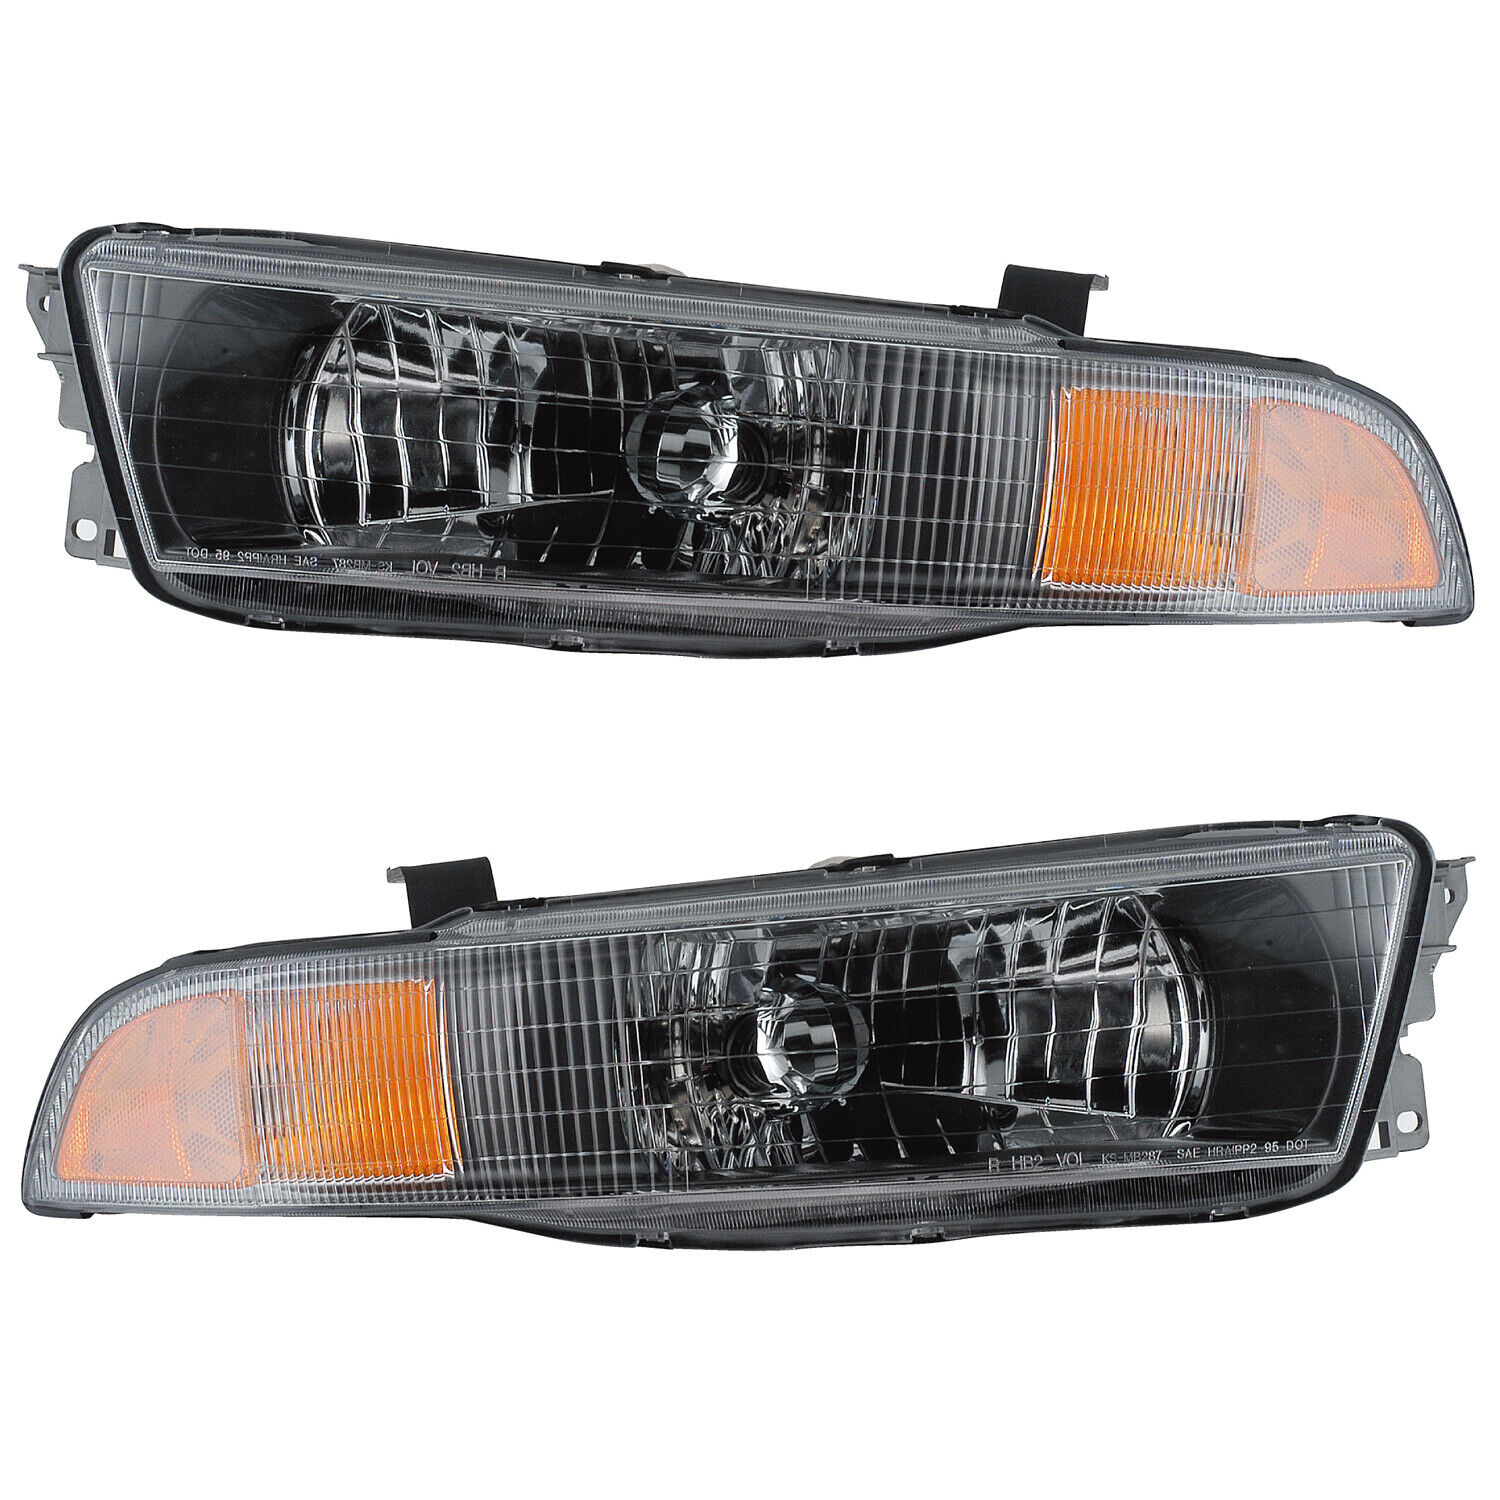 Headlights Front Lamps Pair Set for 02-03 Mitsubishi Galant Left & Right